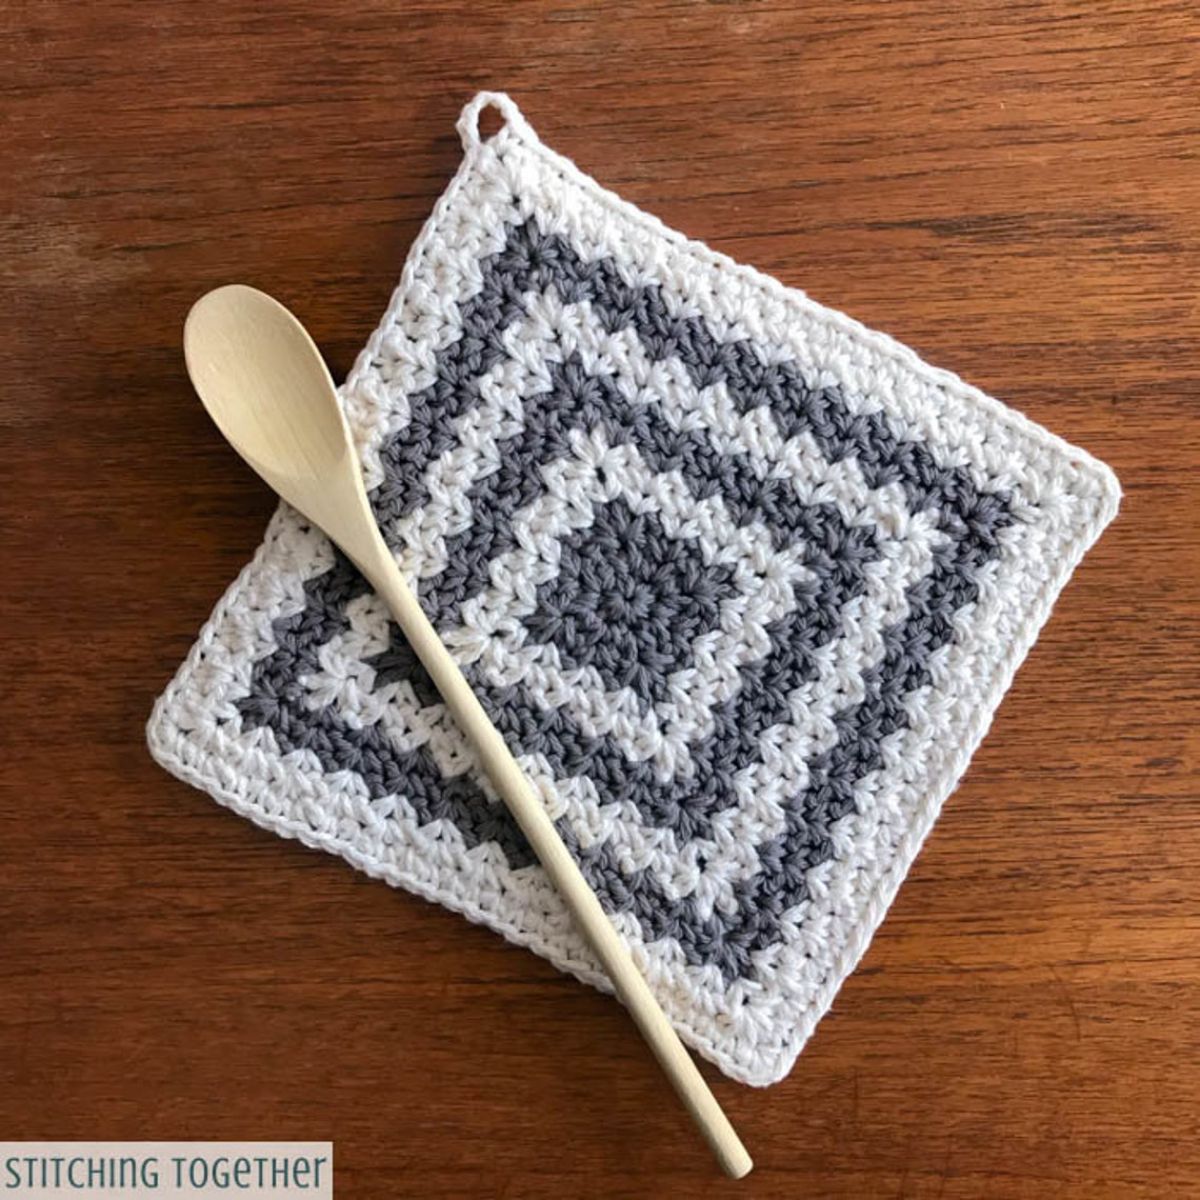 White and gray square crochet hot pad with gray squares getting smaller toward the center and a wooden spoon lying on top.